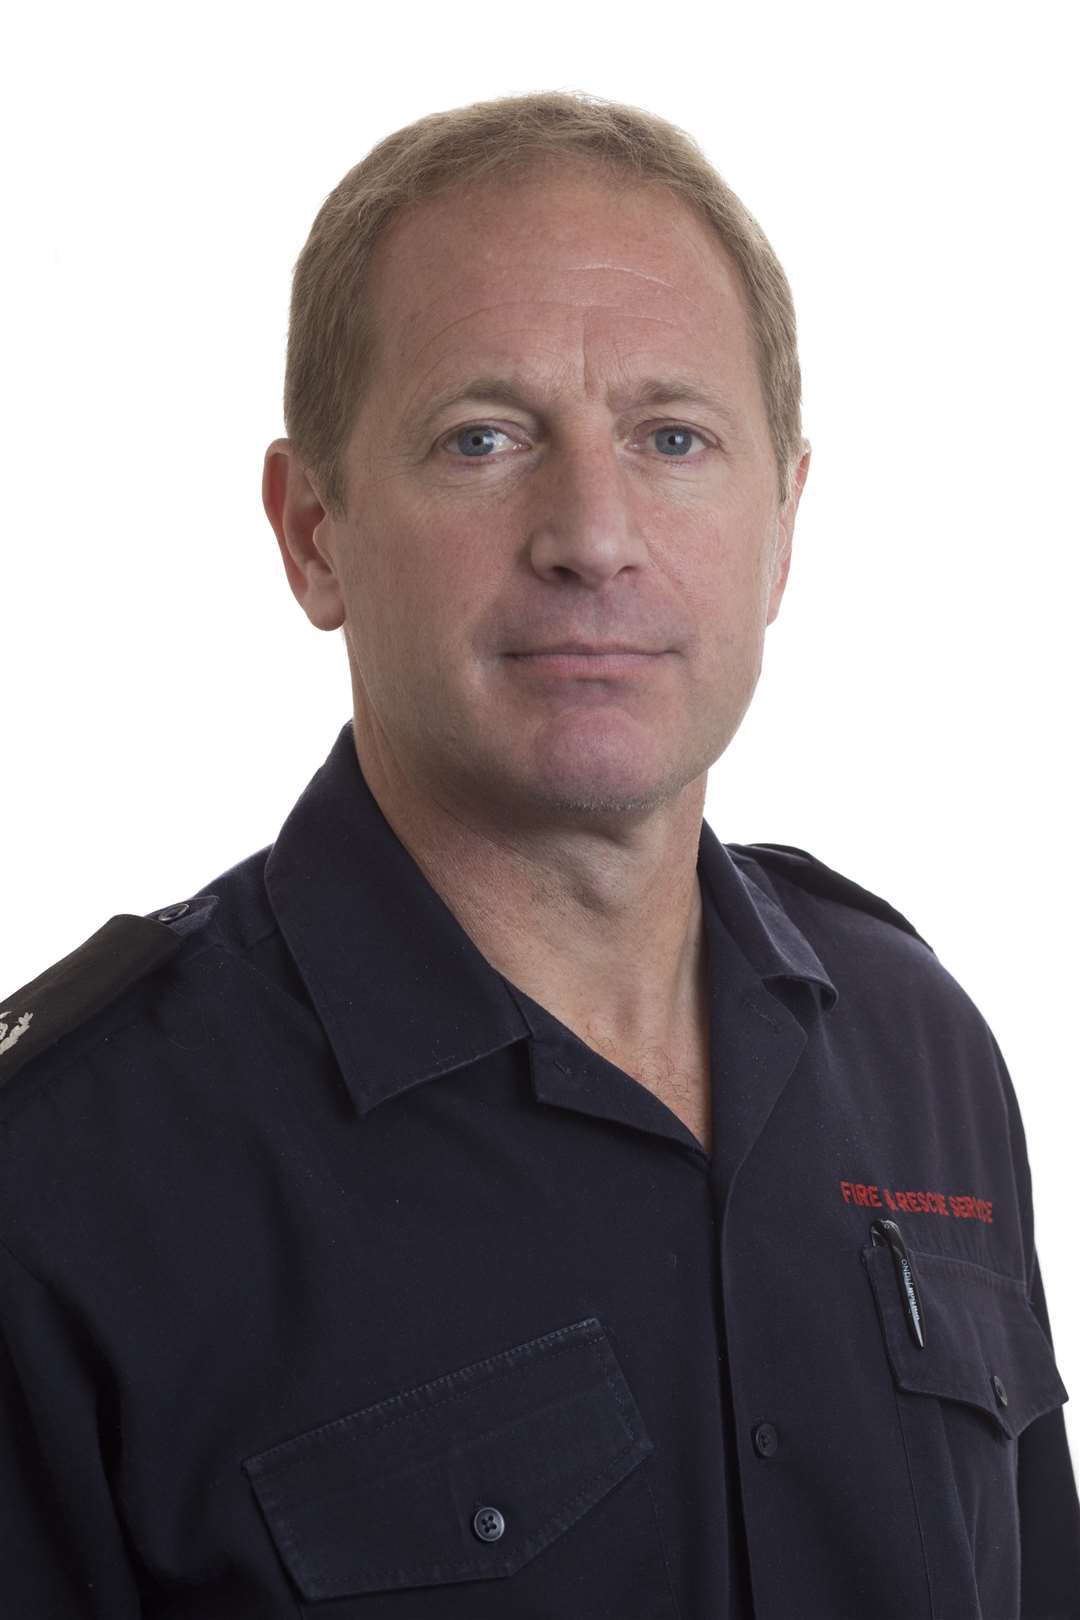 Phil Rice, group manager at Kent Fire and Rescue Service